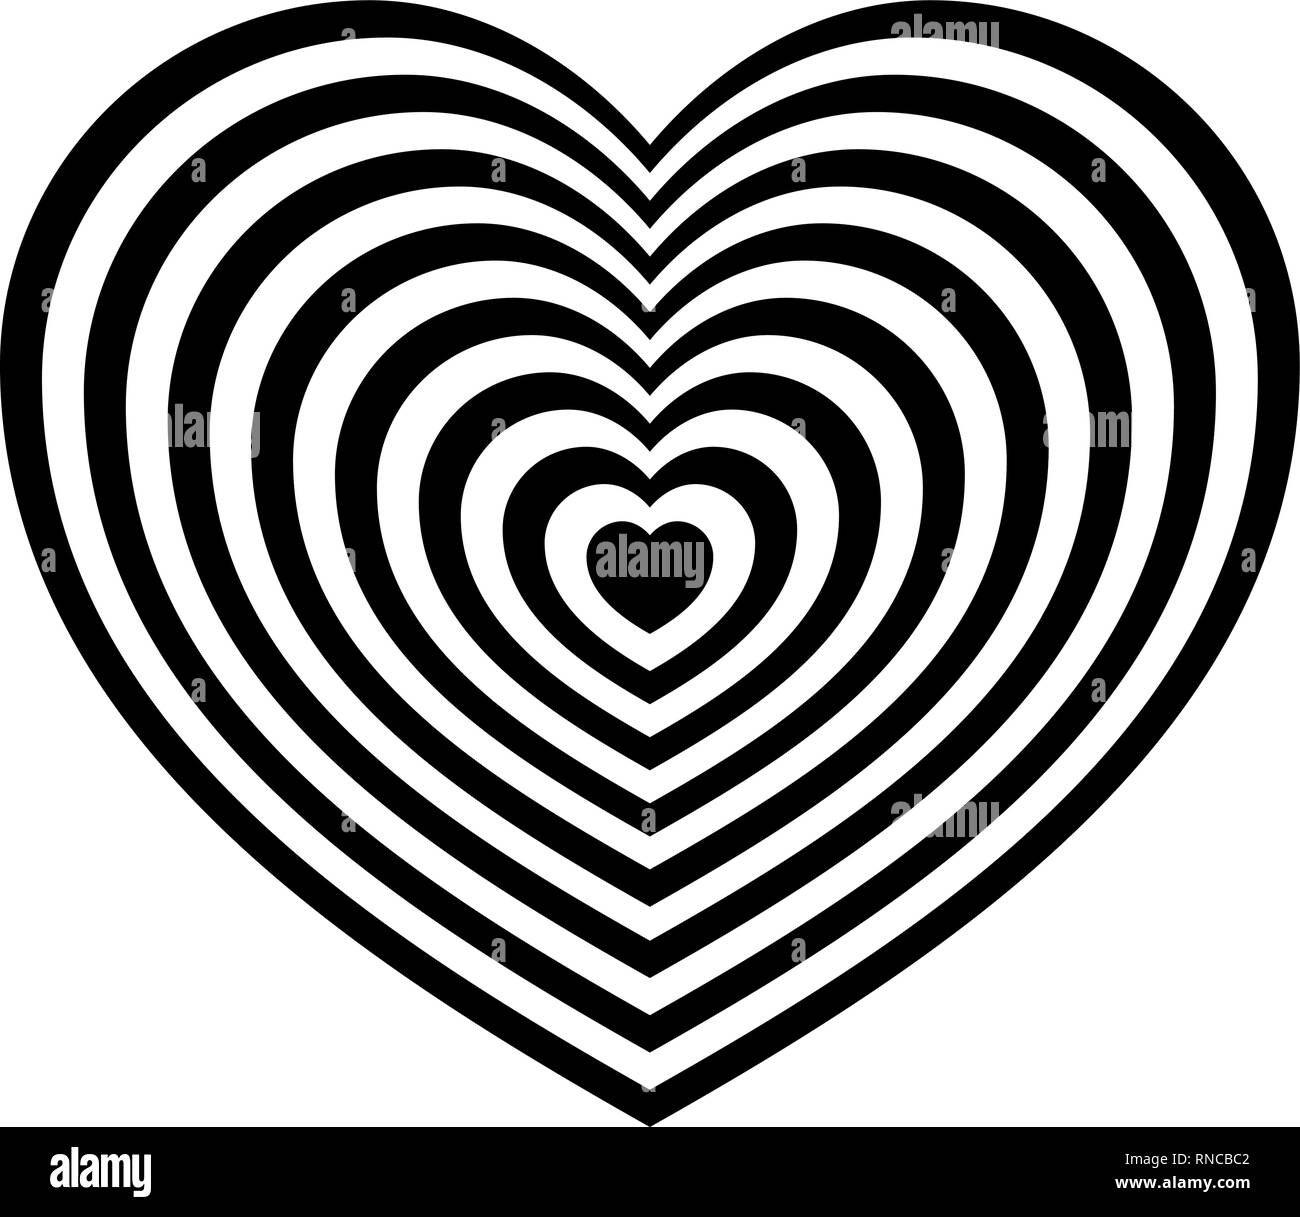 Fashionable, abstract black and white heart for design, advertising, cards, packaging, icons. Vector template. Stock Vector